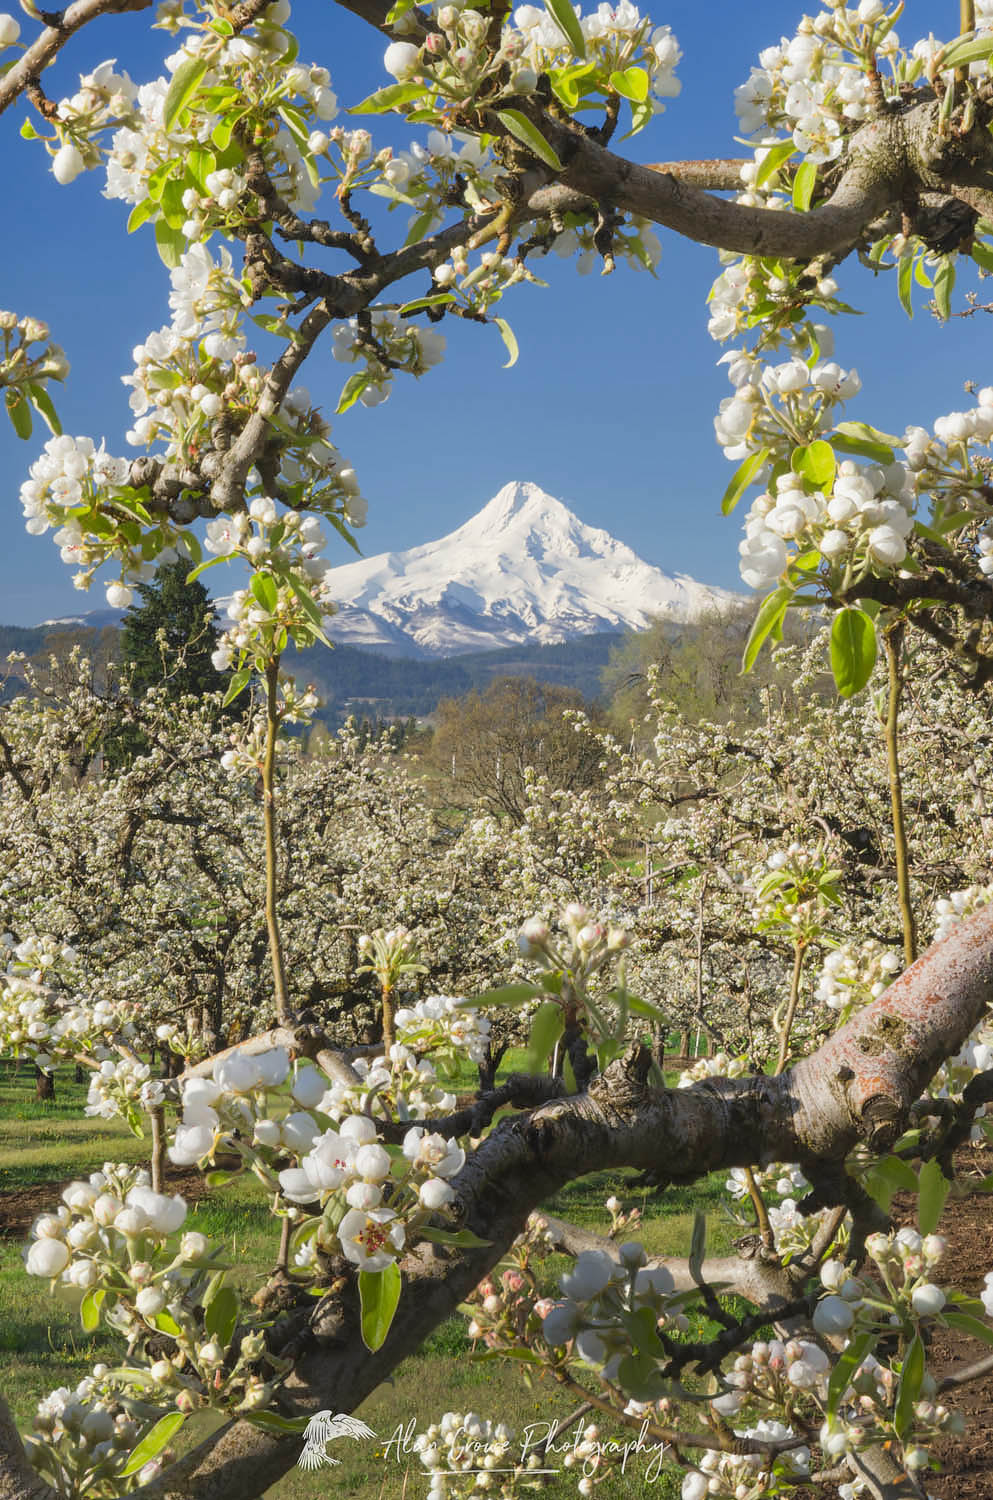 Fruit trees blooming in spring. Mount Hood, Cascade Range stratovolcano elevation 11,249 ft (3,429 m) is in the distance. Hood River Valley Orchards, Oregon #60108